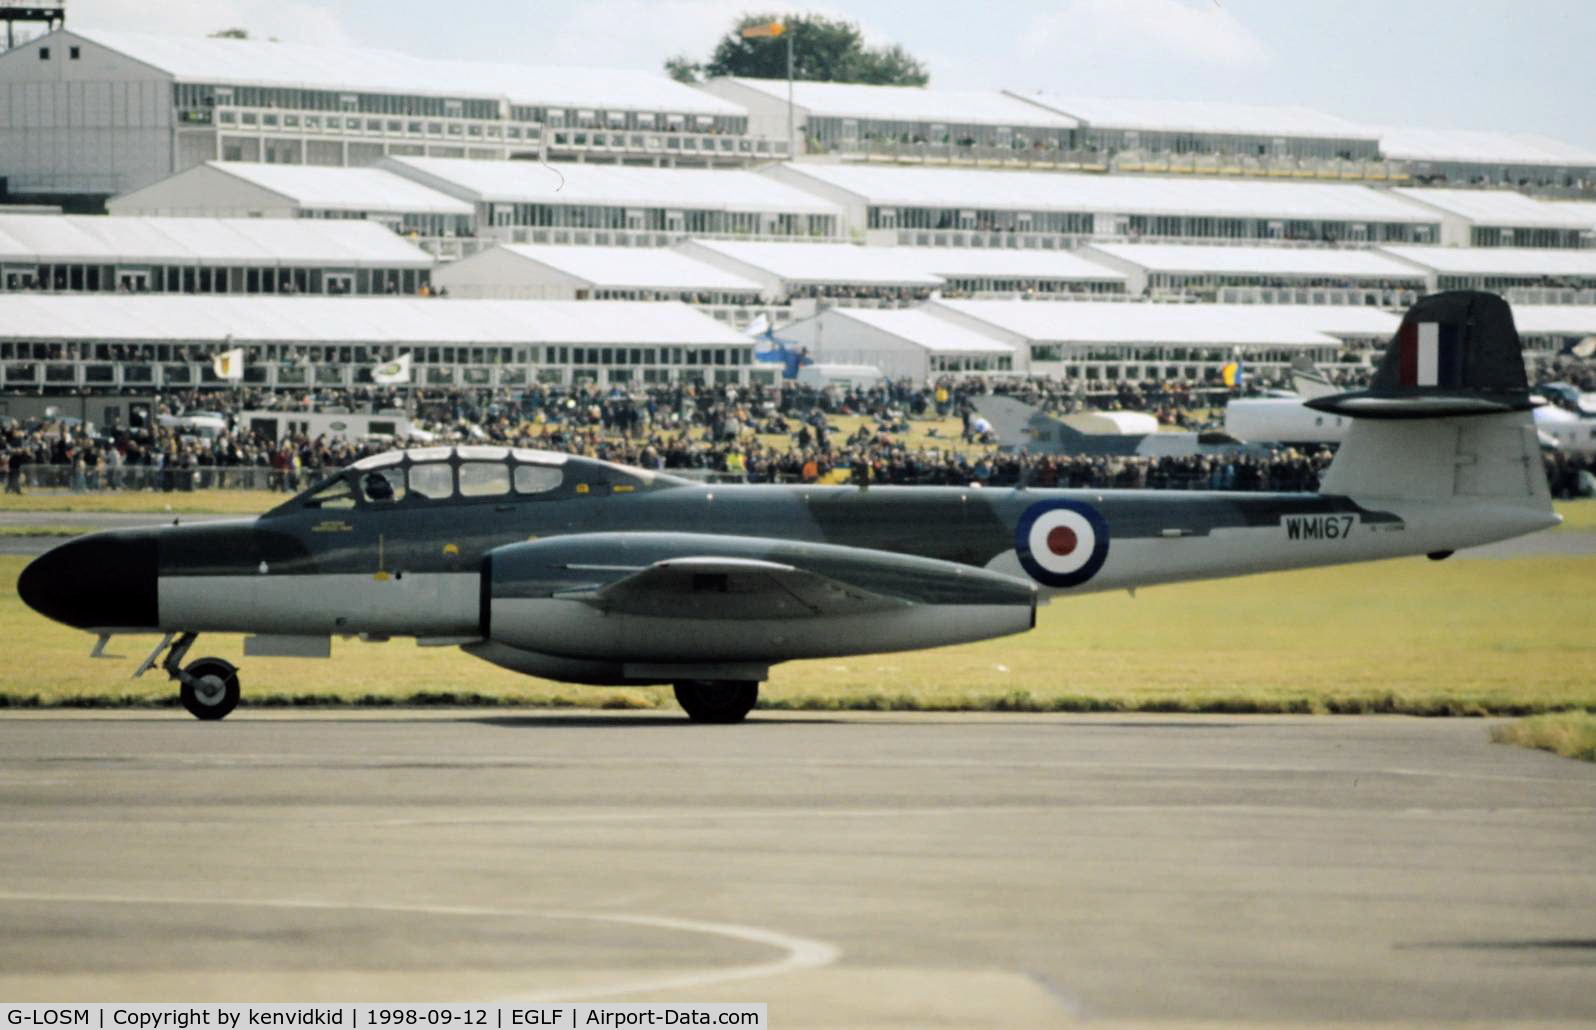 G-LOSM, 1952 Gloster Meteor NF.11 C/N S4/U/2342, Taxying for take off at the 1998 Farnborough International Air Show.